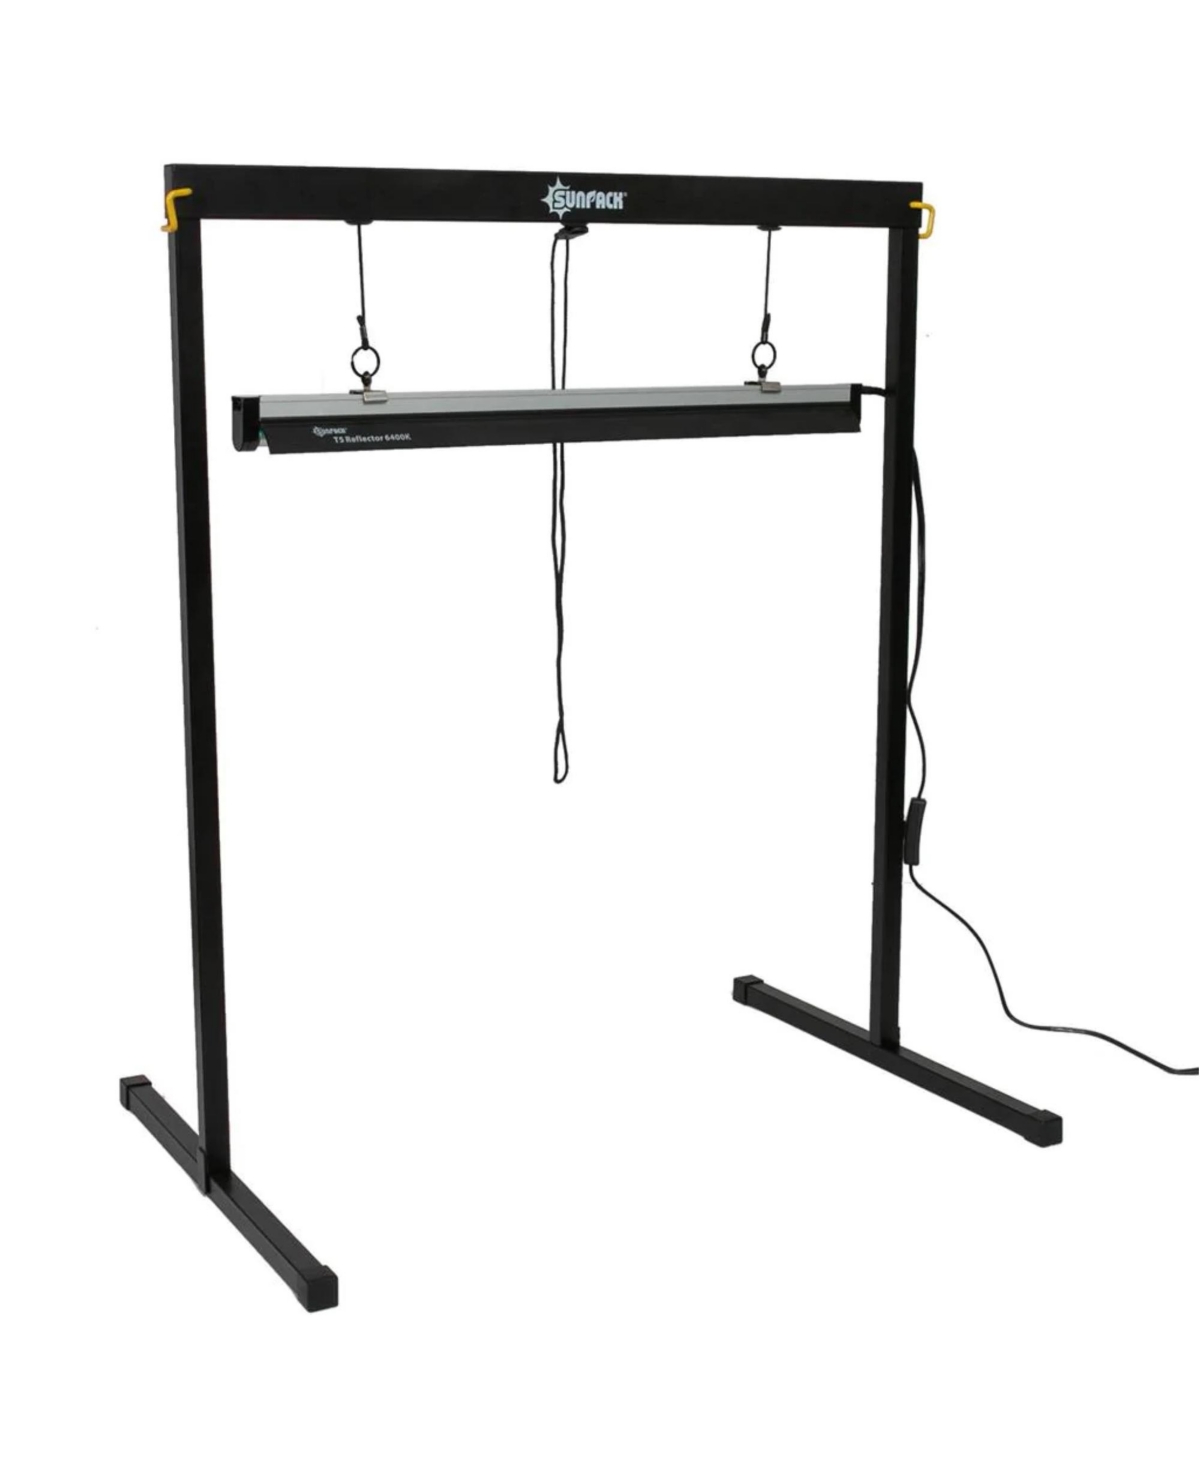 Greenhouse Metal Light Stand with Light System, 2' - Black